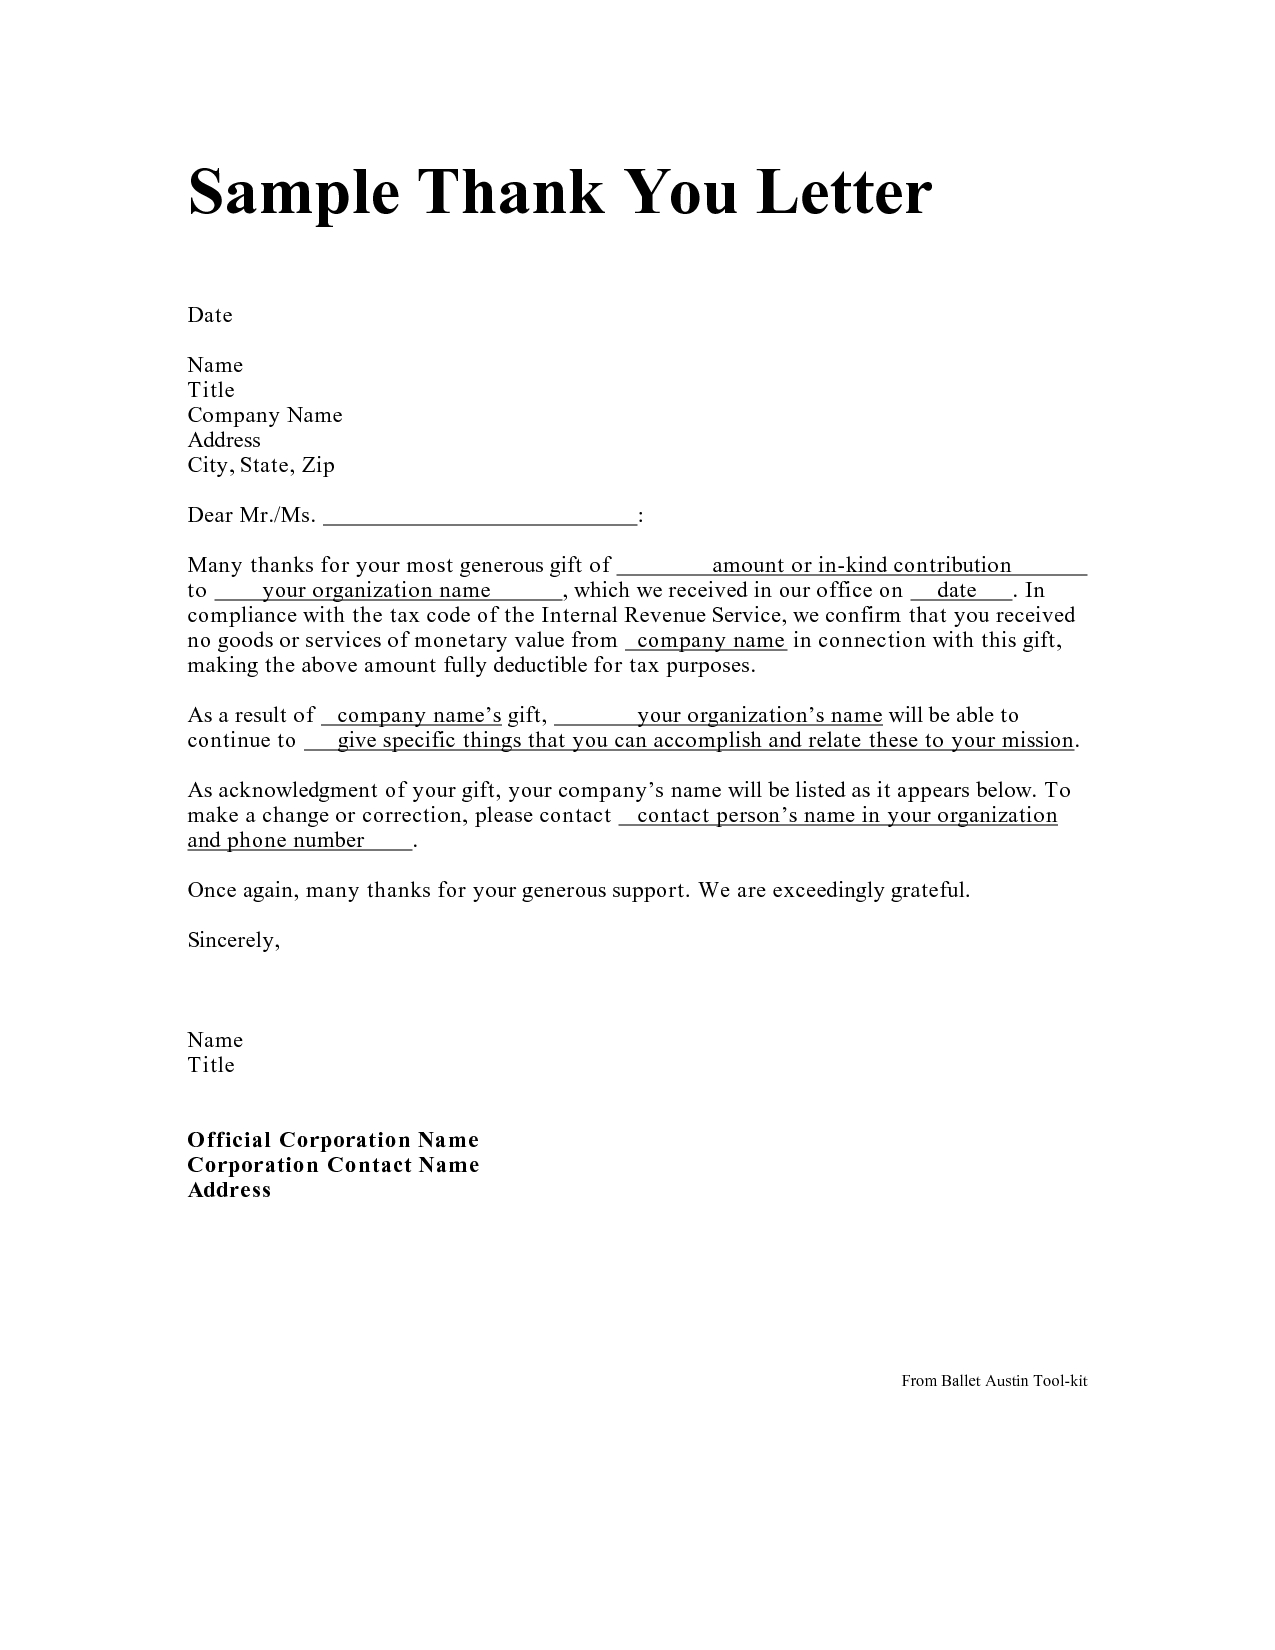 thank you for your donation letter template example-Personal Thank You Letter Personal Thank You Letter Samples Writing Thank You Notes Thank You Note Examples 9-p